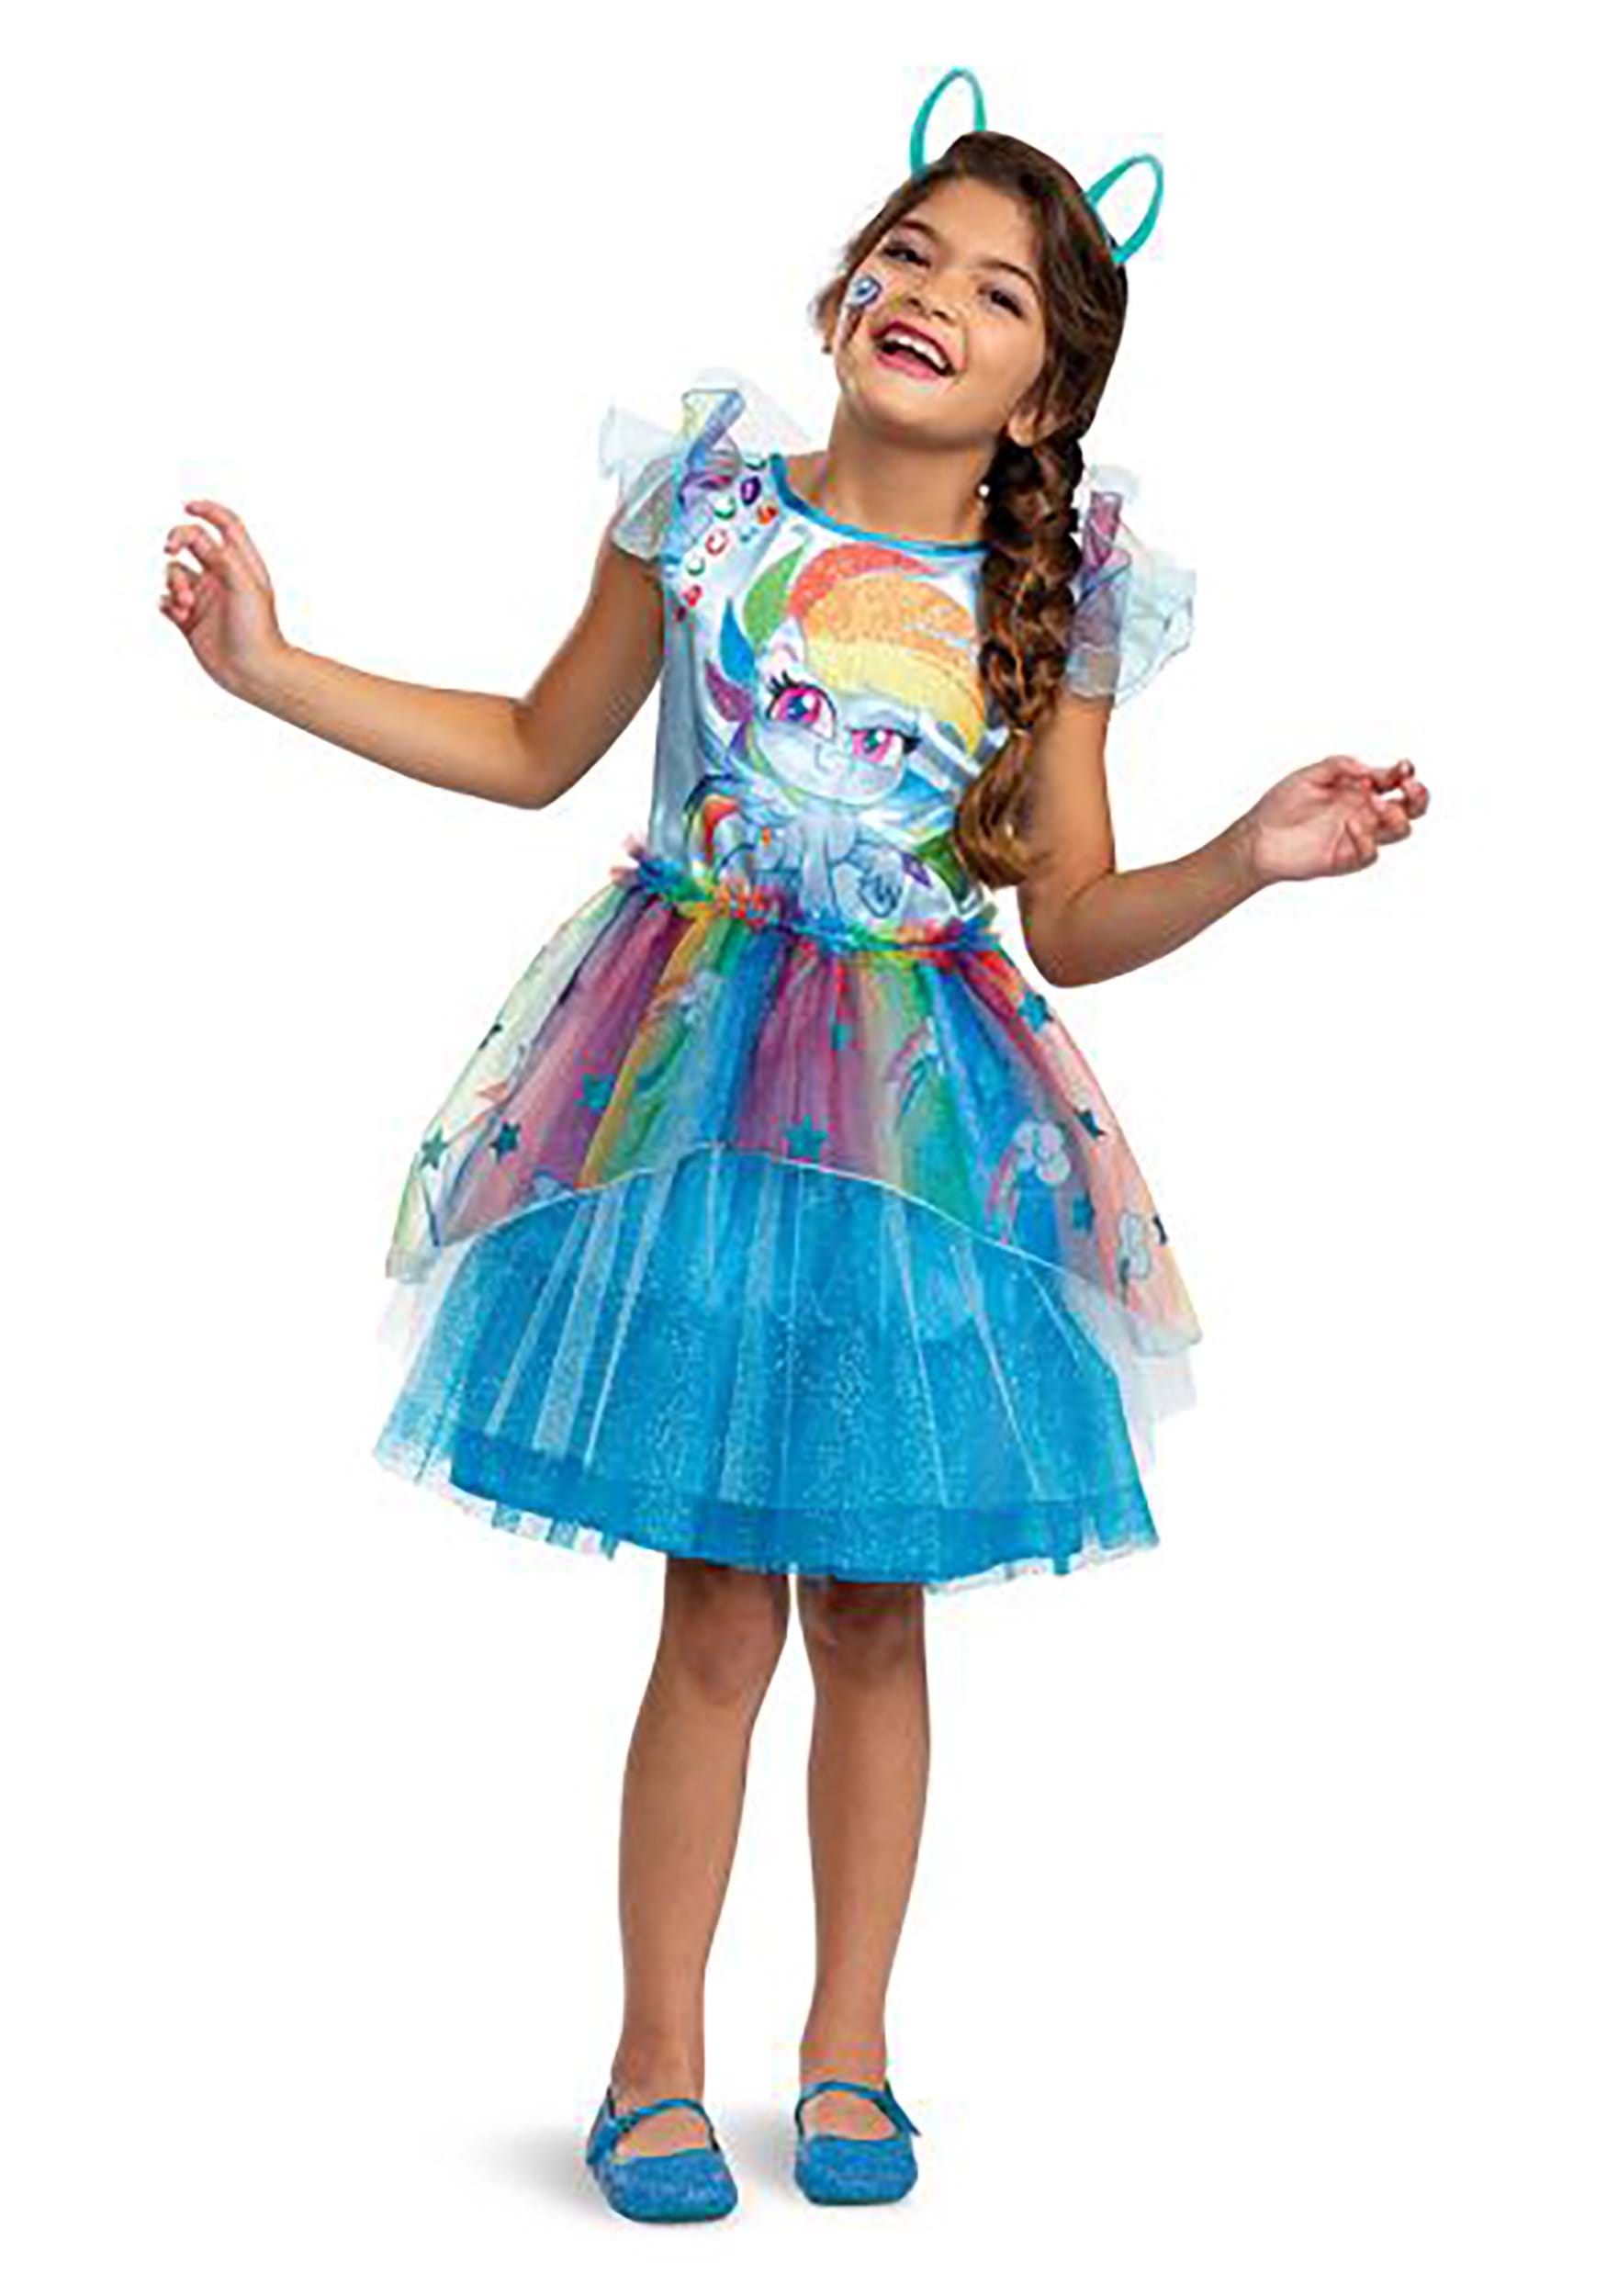 Details about   Rainbow Dash Girls Deluxe Pony Costume My Little Girls Fairy Tale Unicorn Outfit 